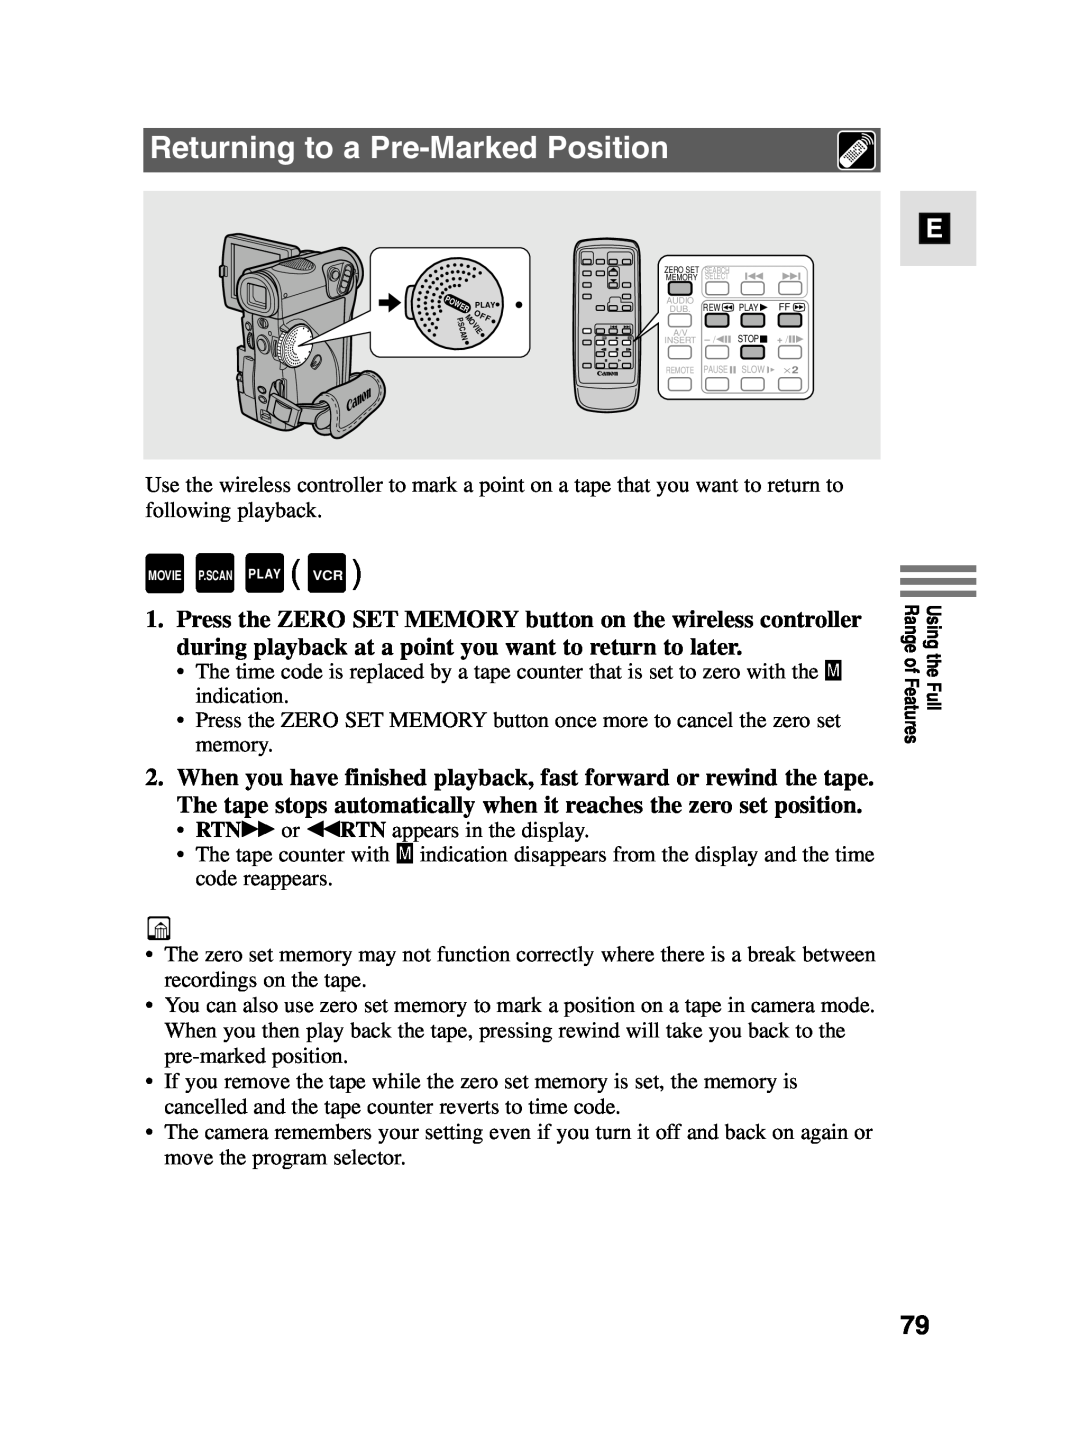 Canon MV4i MC instruction manual Returning to a Pre-Marked Position 